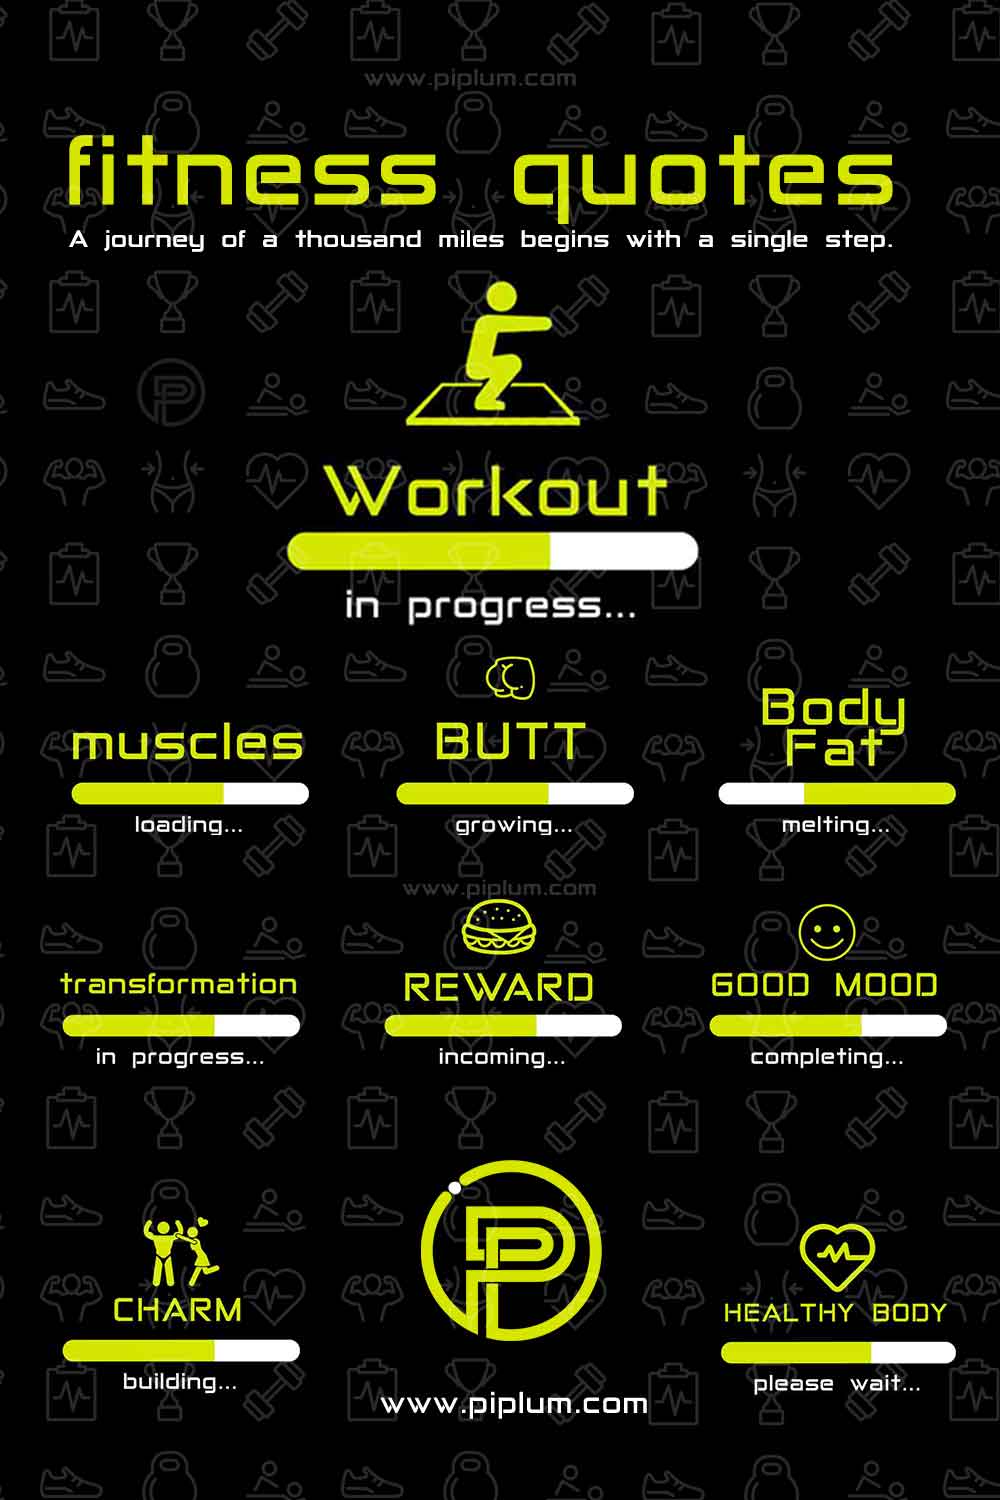 inspirational-fitness-poster-with-inspirational-workout-quotes